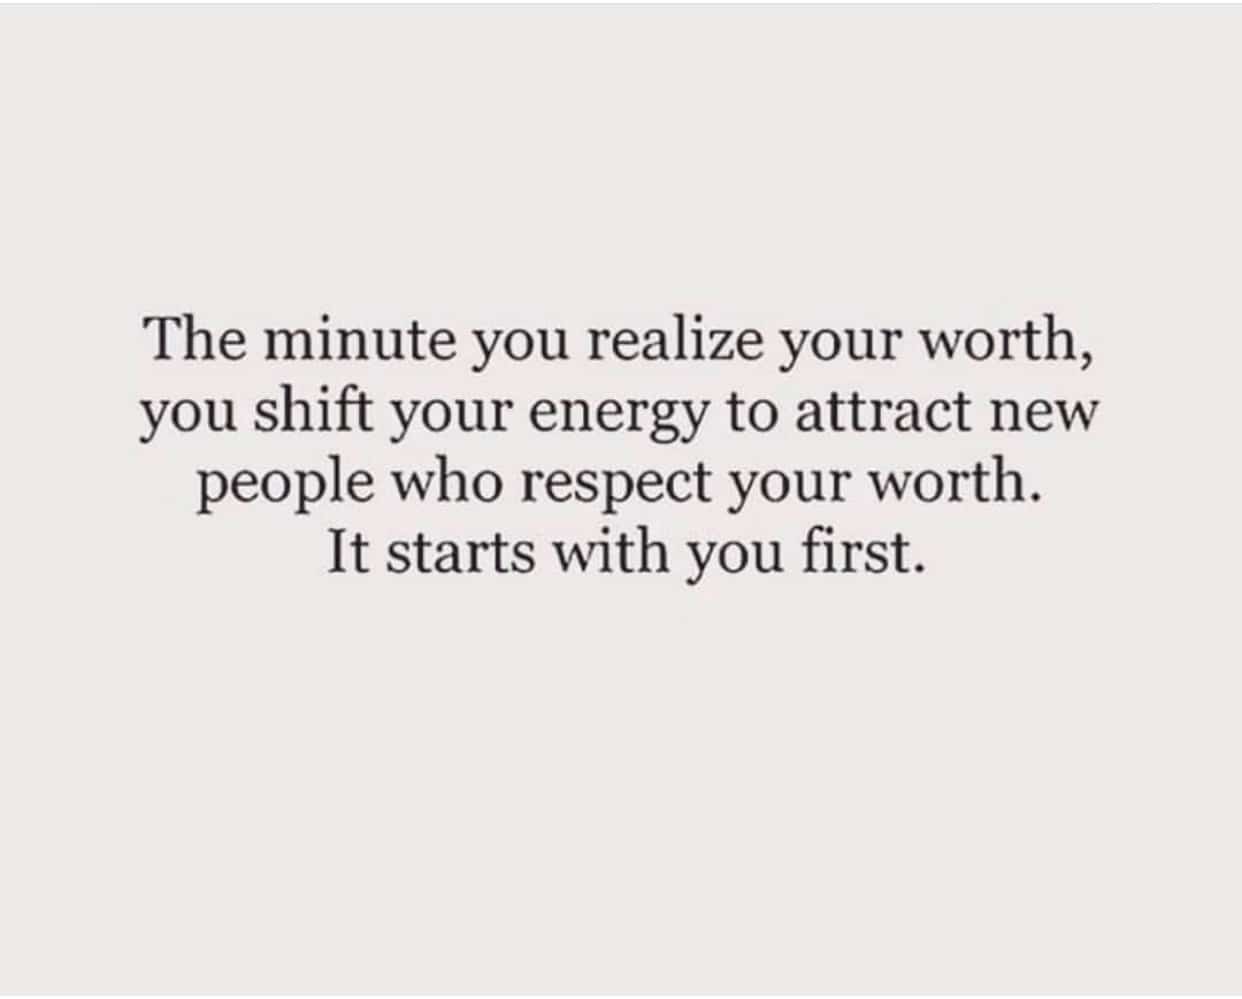 Realize your worth - Grace!